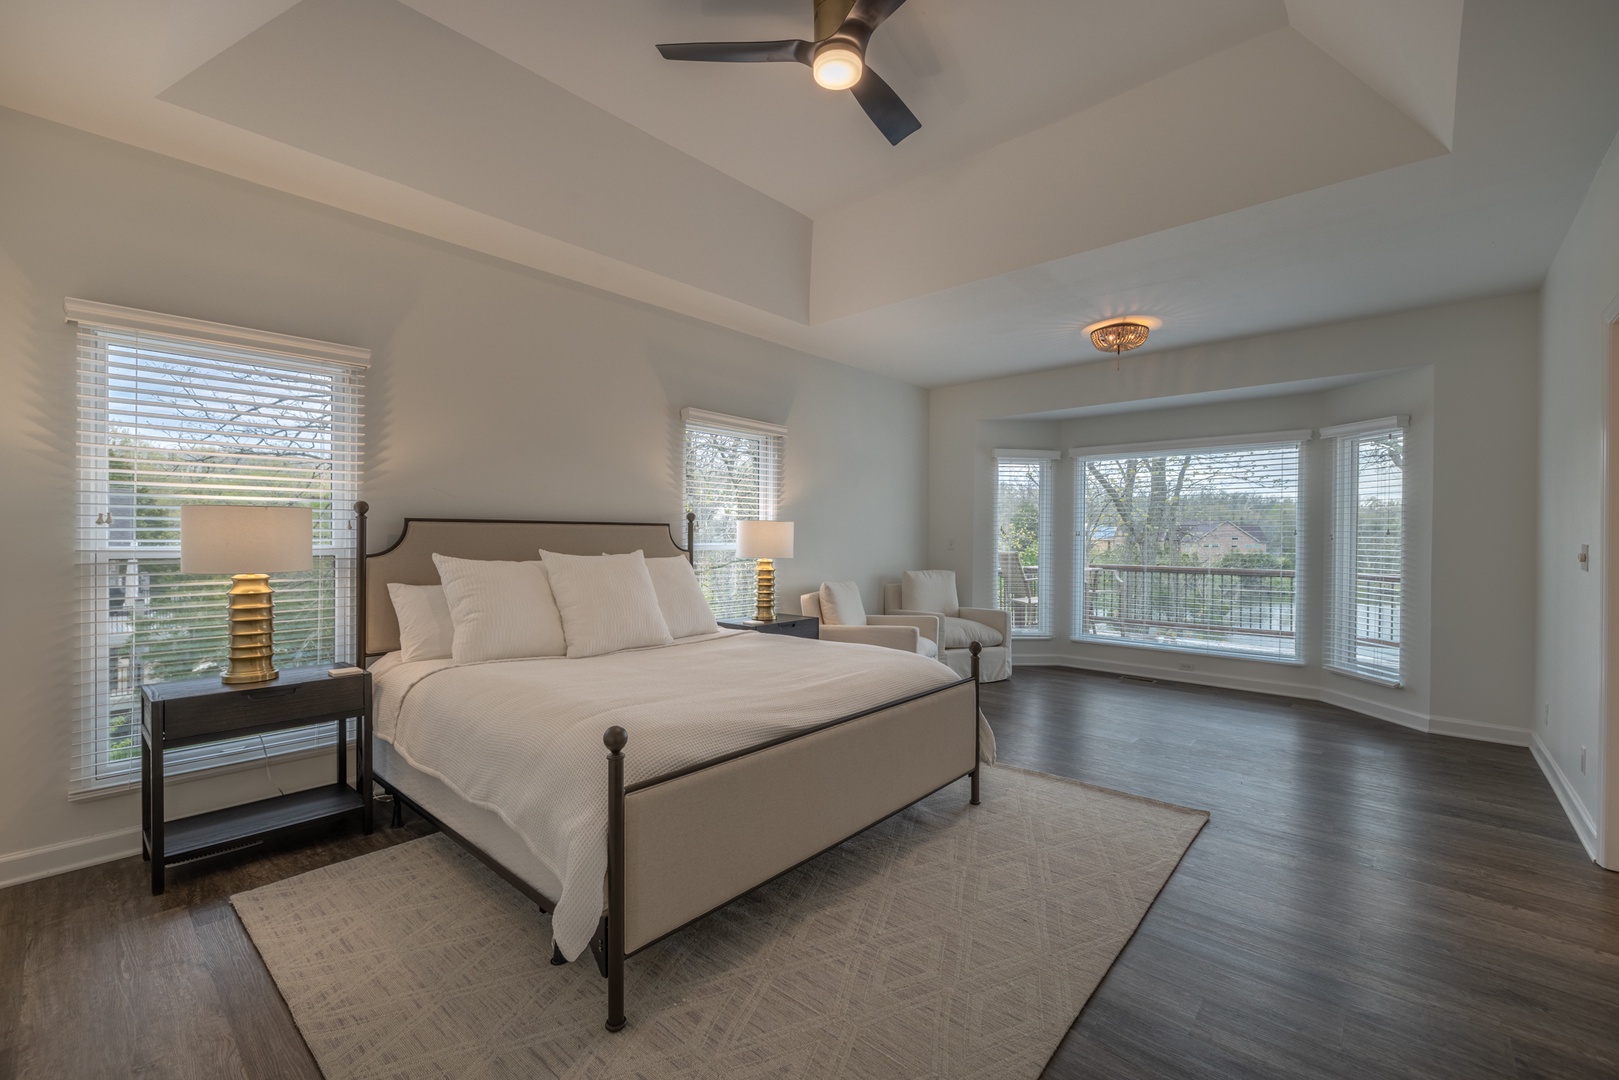 The beautiful primary suite outfitted with one king bed and amazing views of Lake Charrette